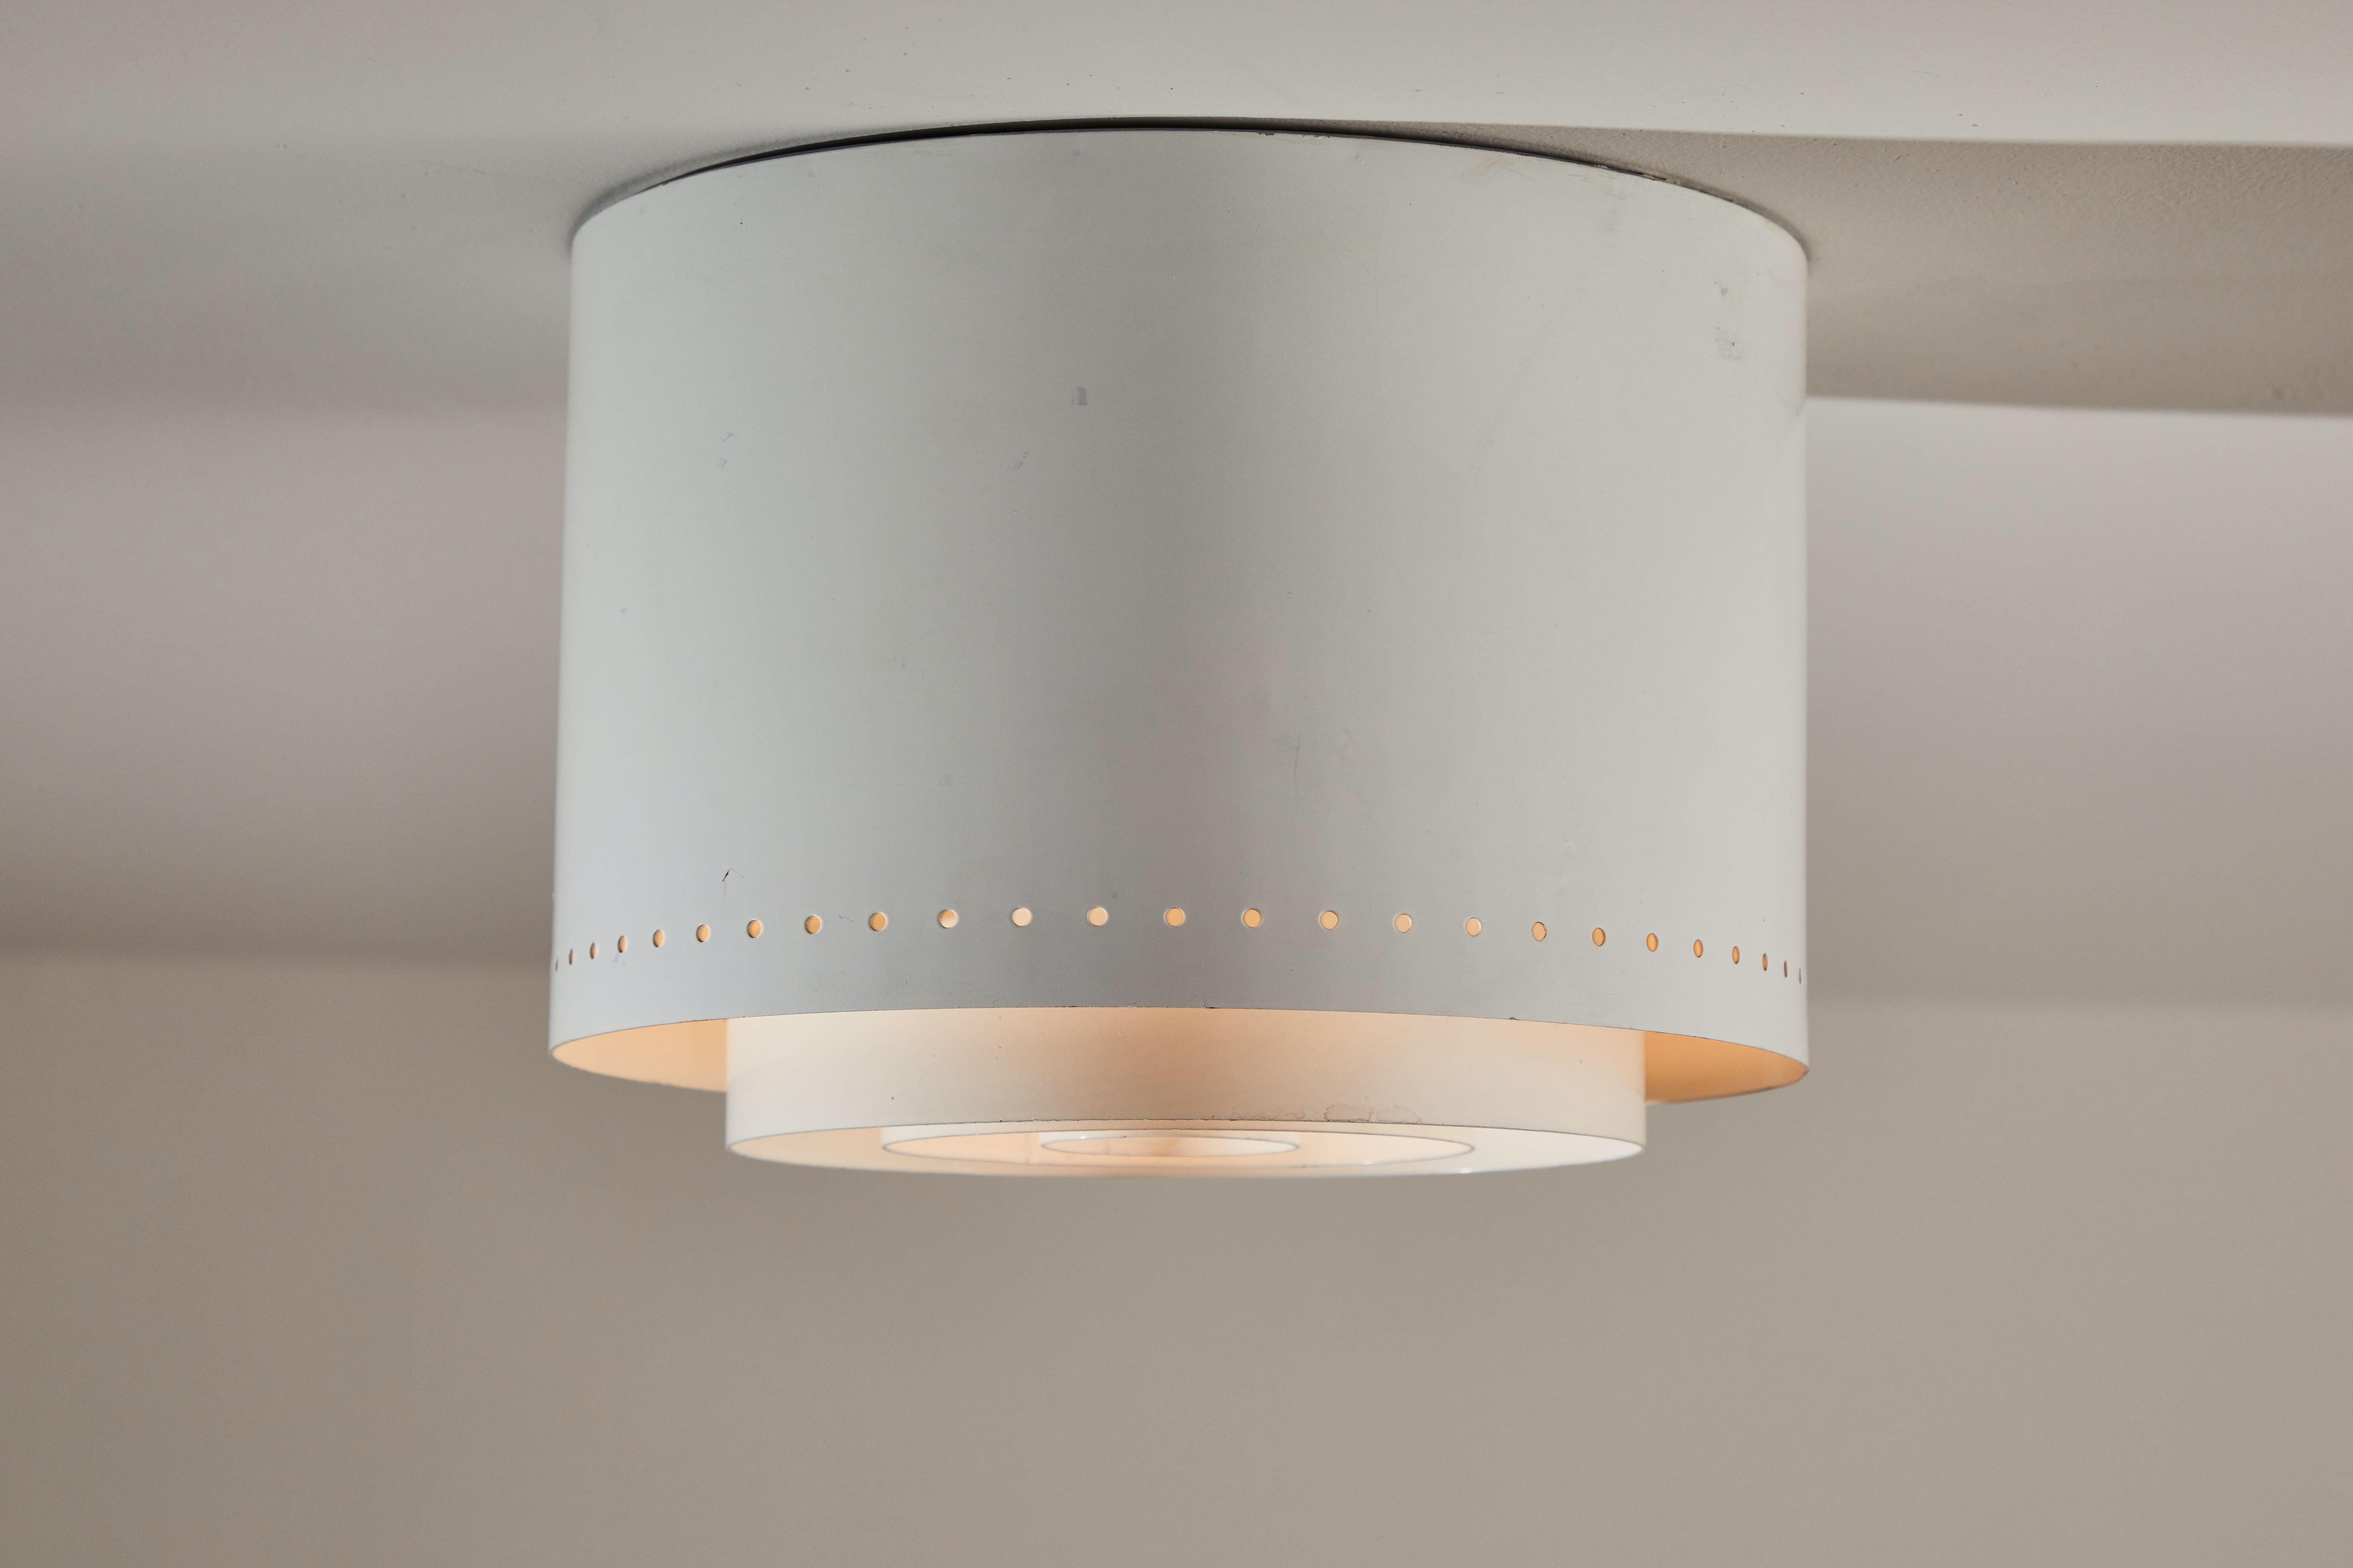 Metal One Flush Mount Ceiling Lights by Itsu